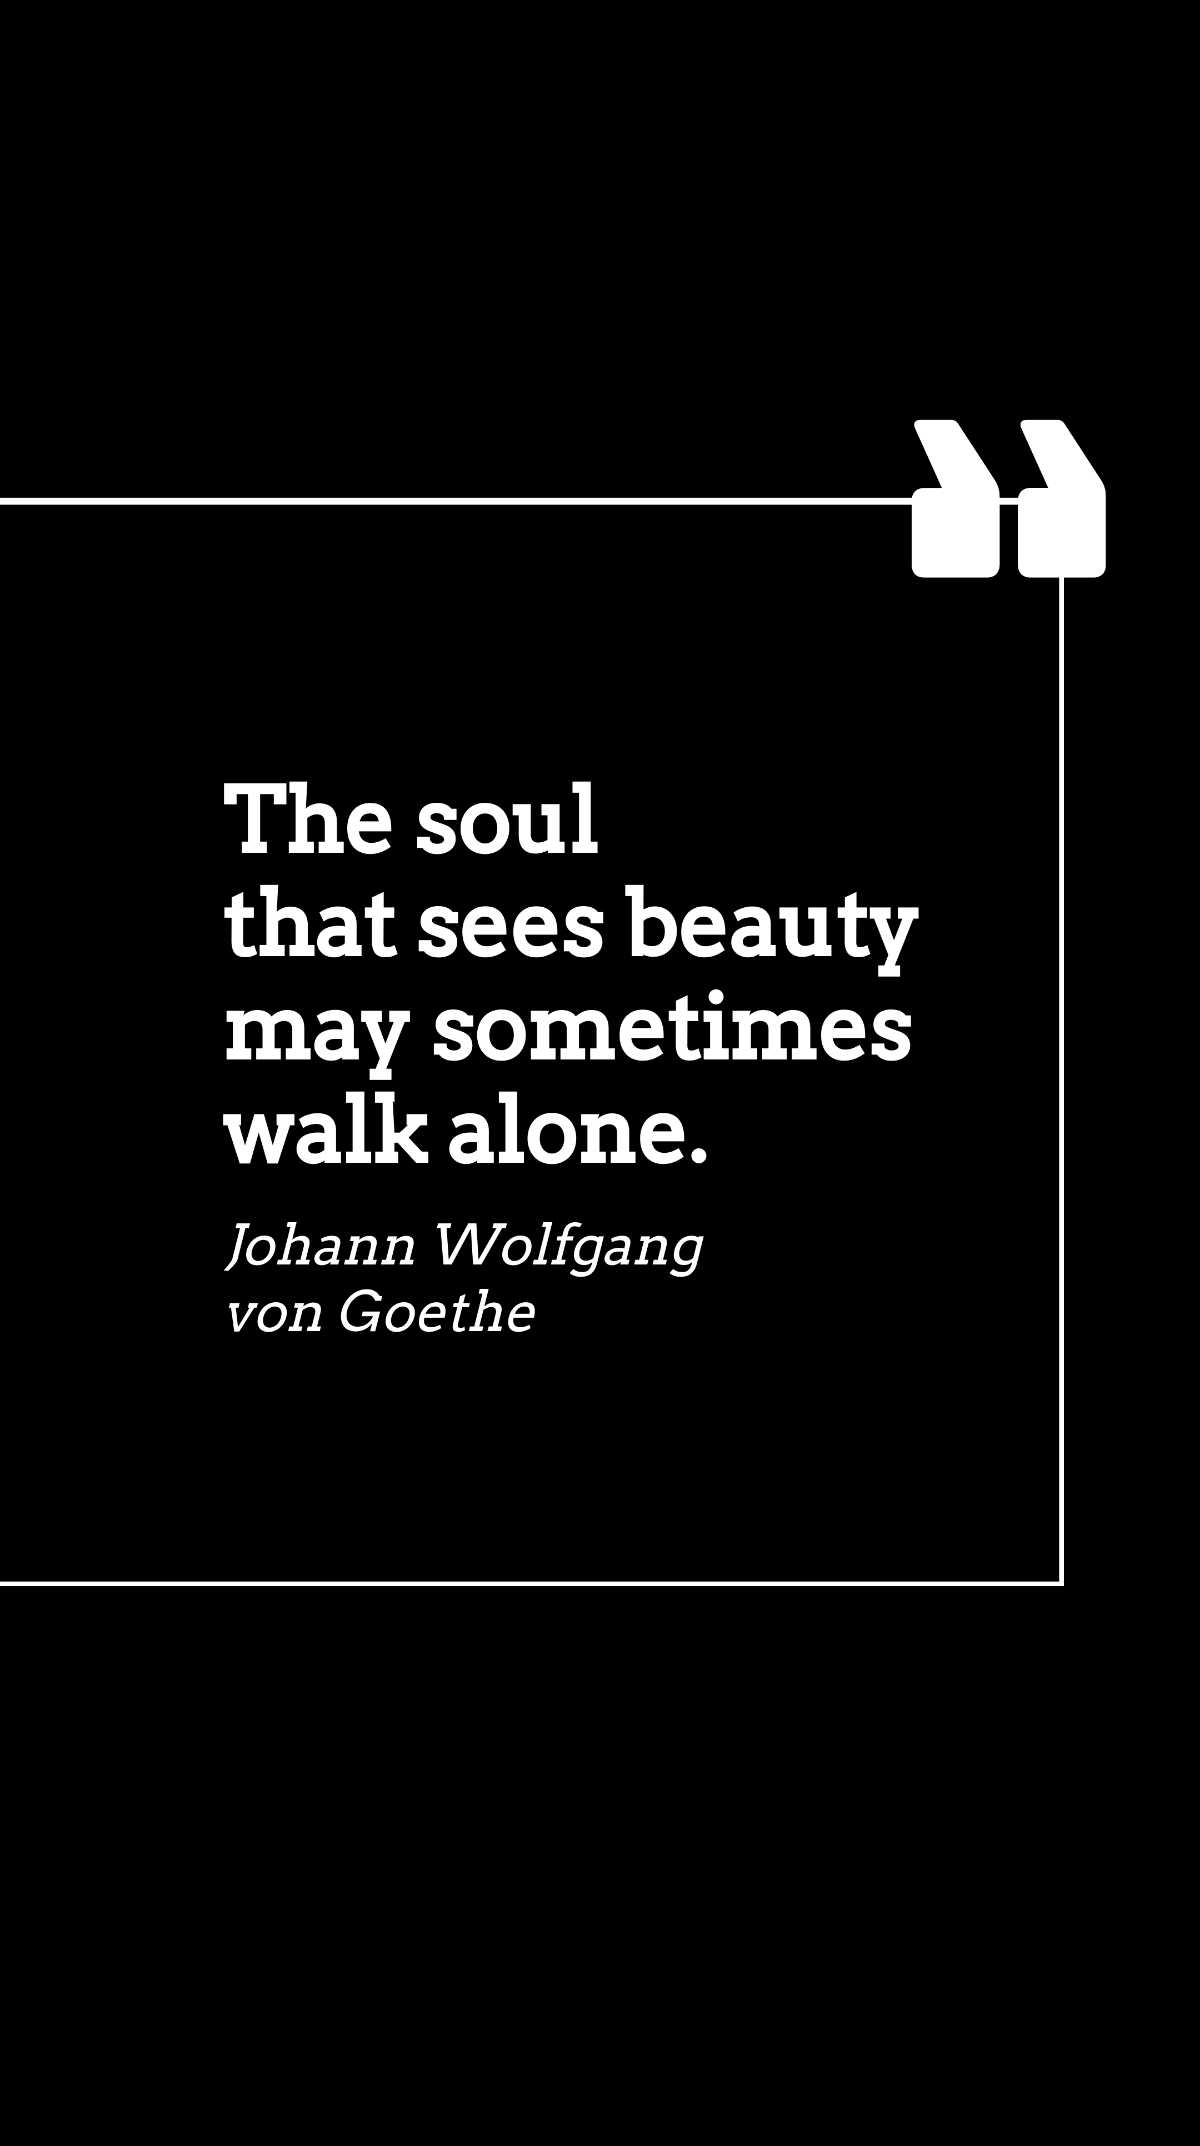 Free Johann Wolfgang von Goethe - The soul that sees beauty may sometimes walk alone. Template